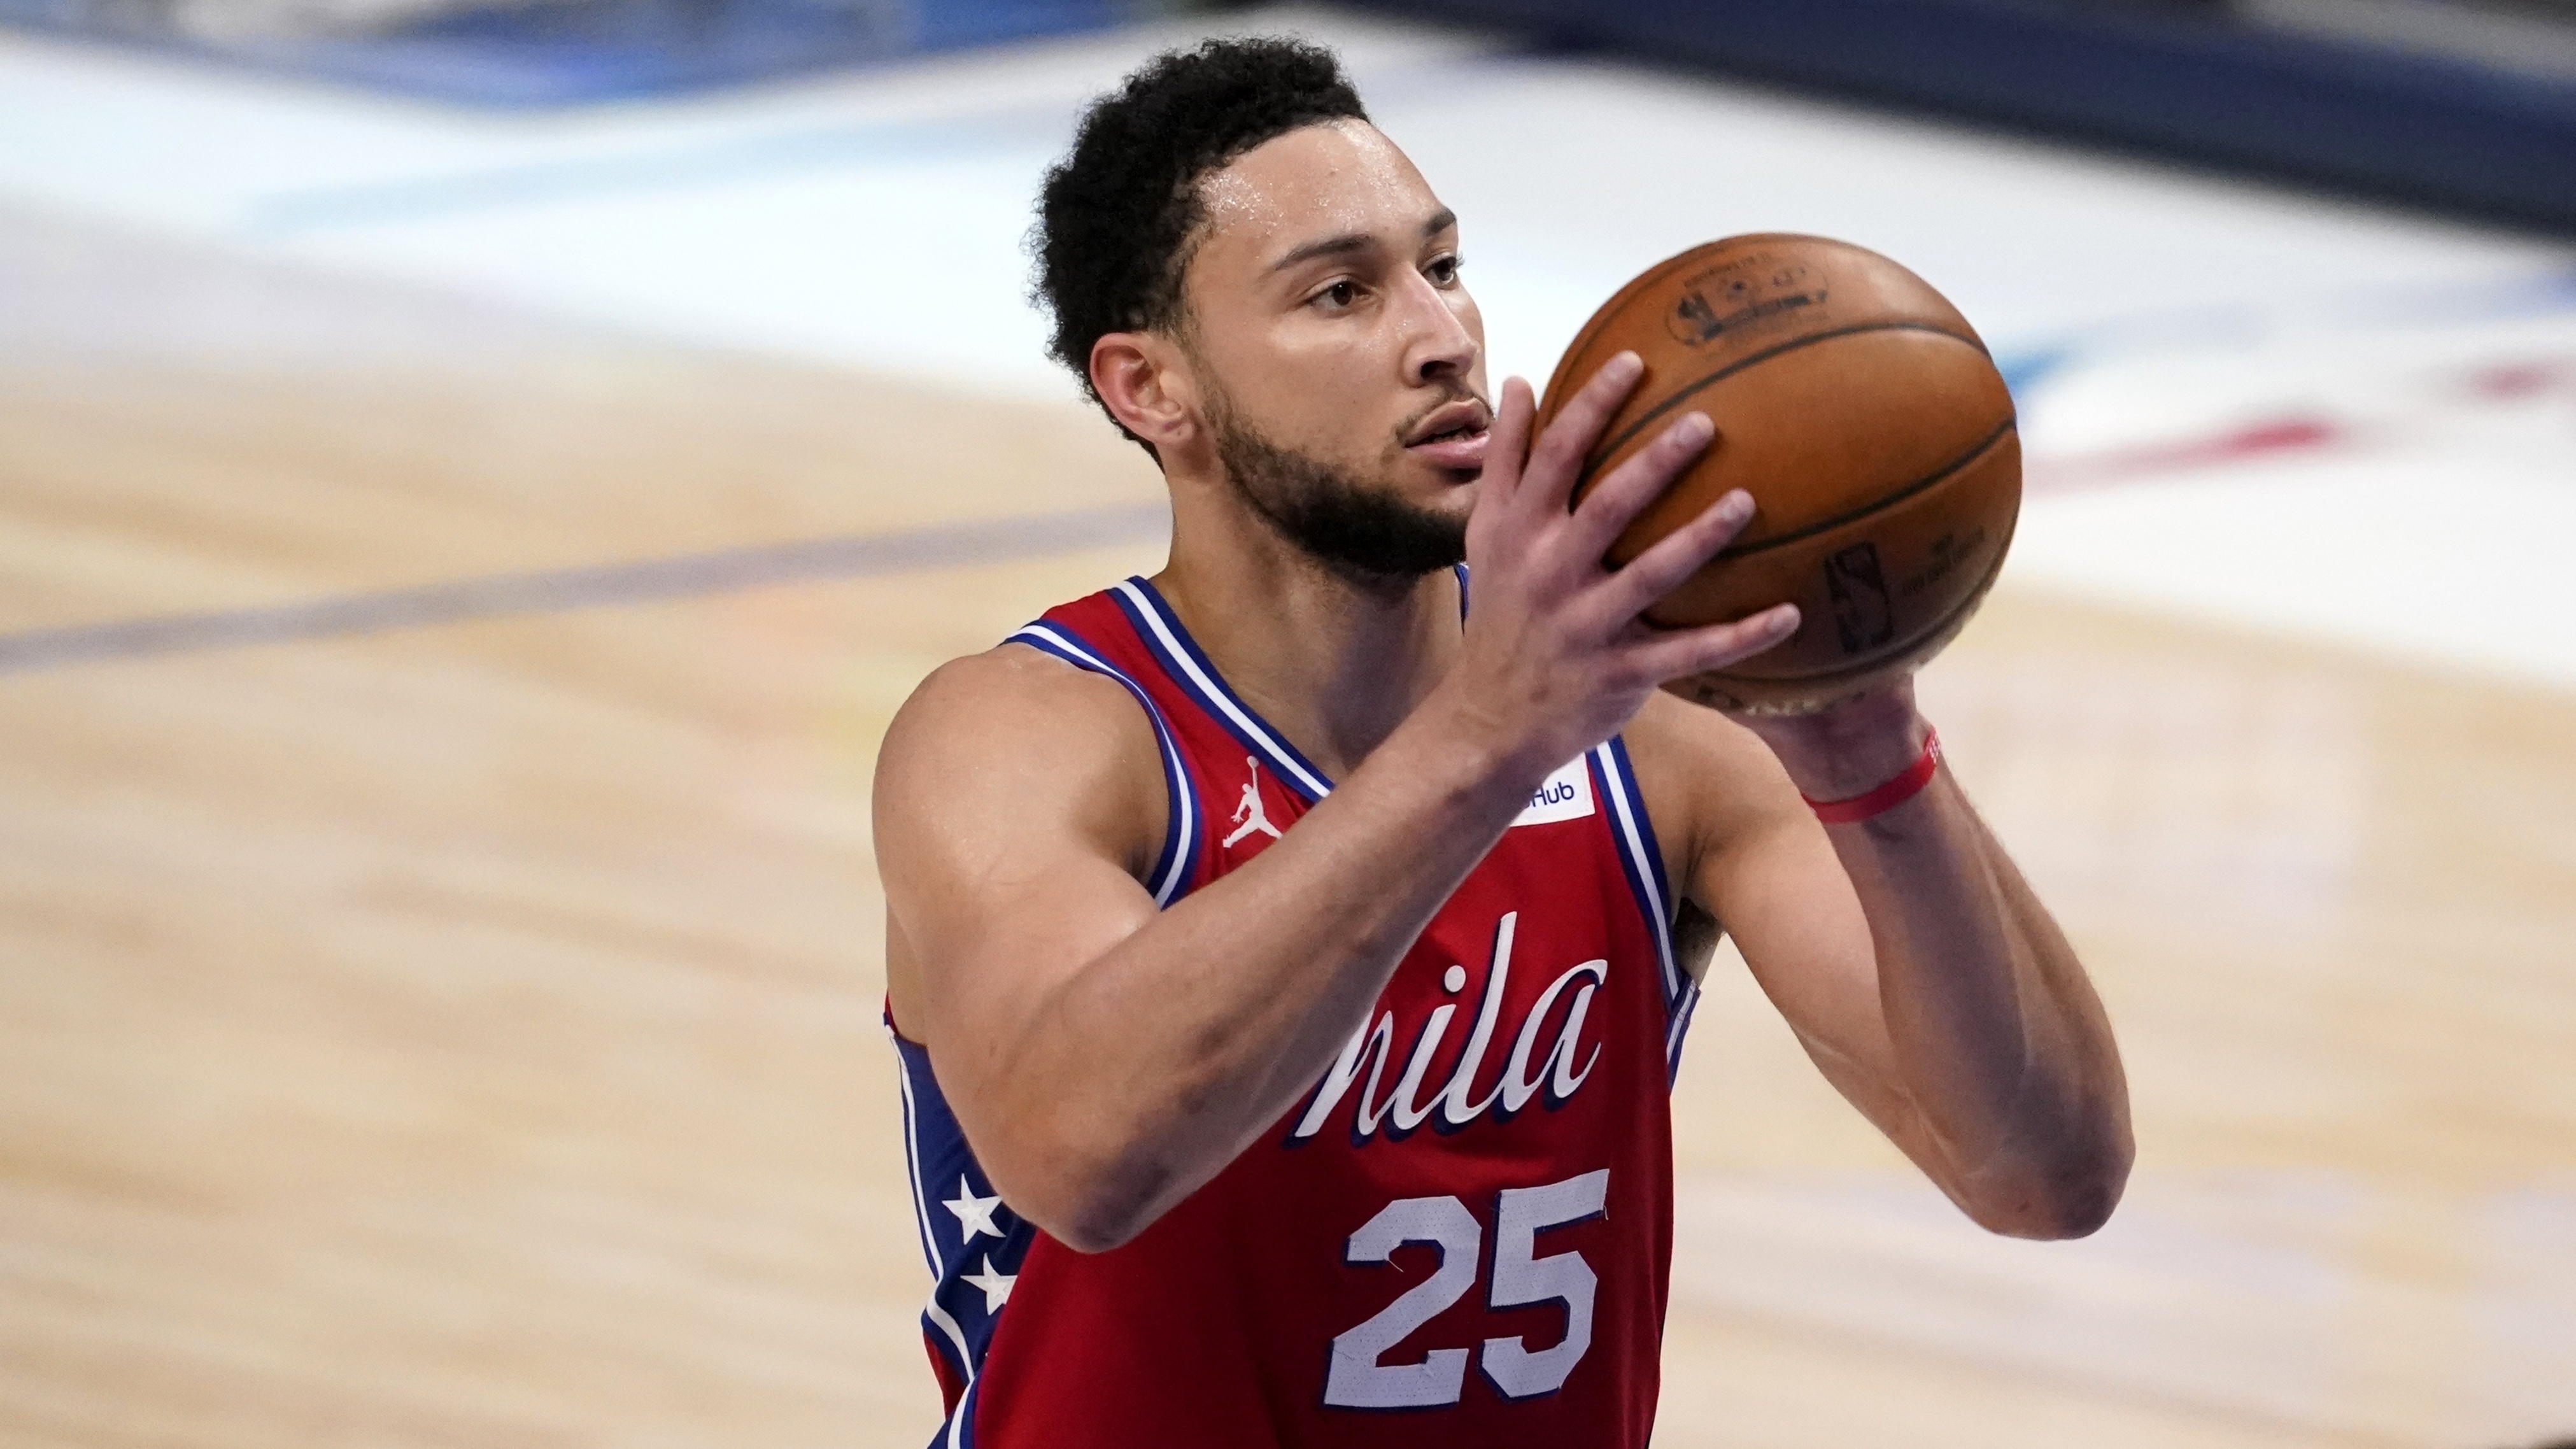 76ers' Ben Simmons skips planned workout: report